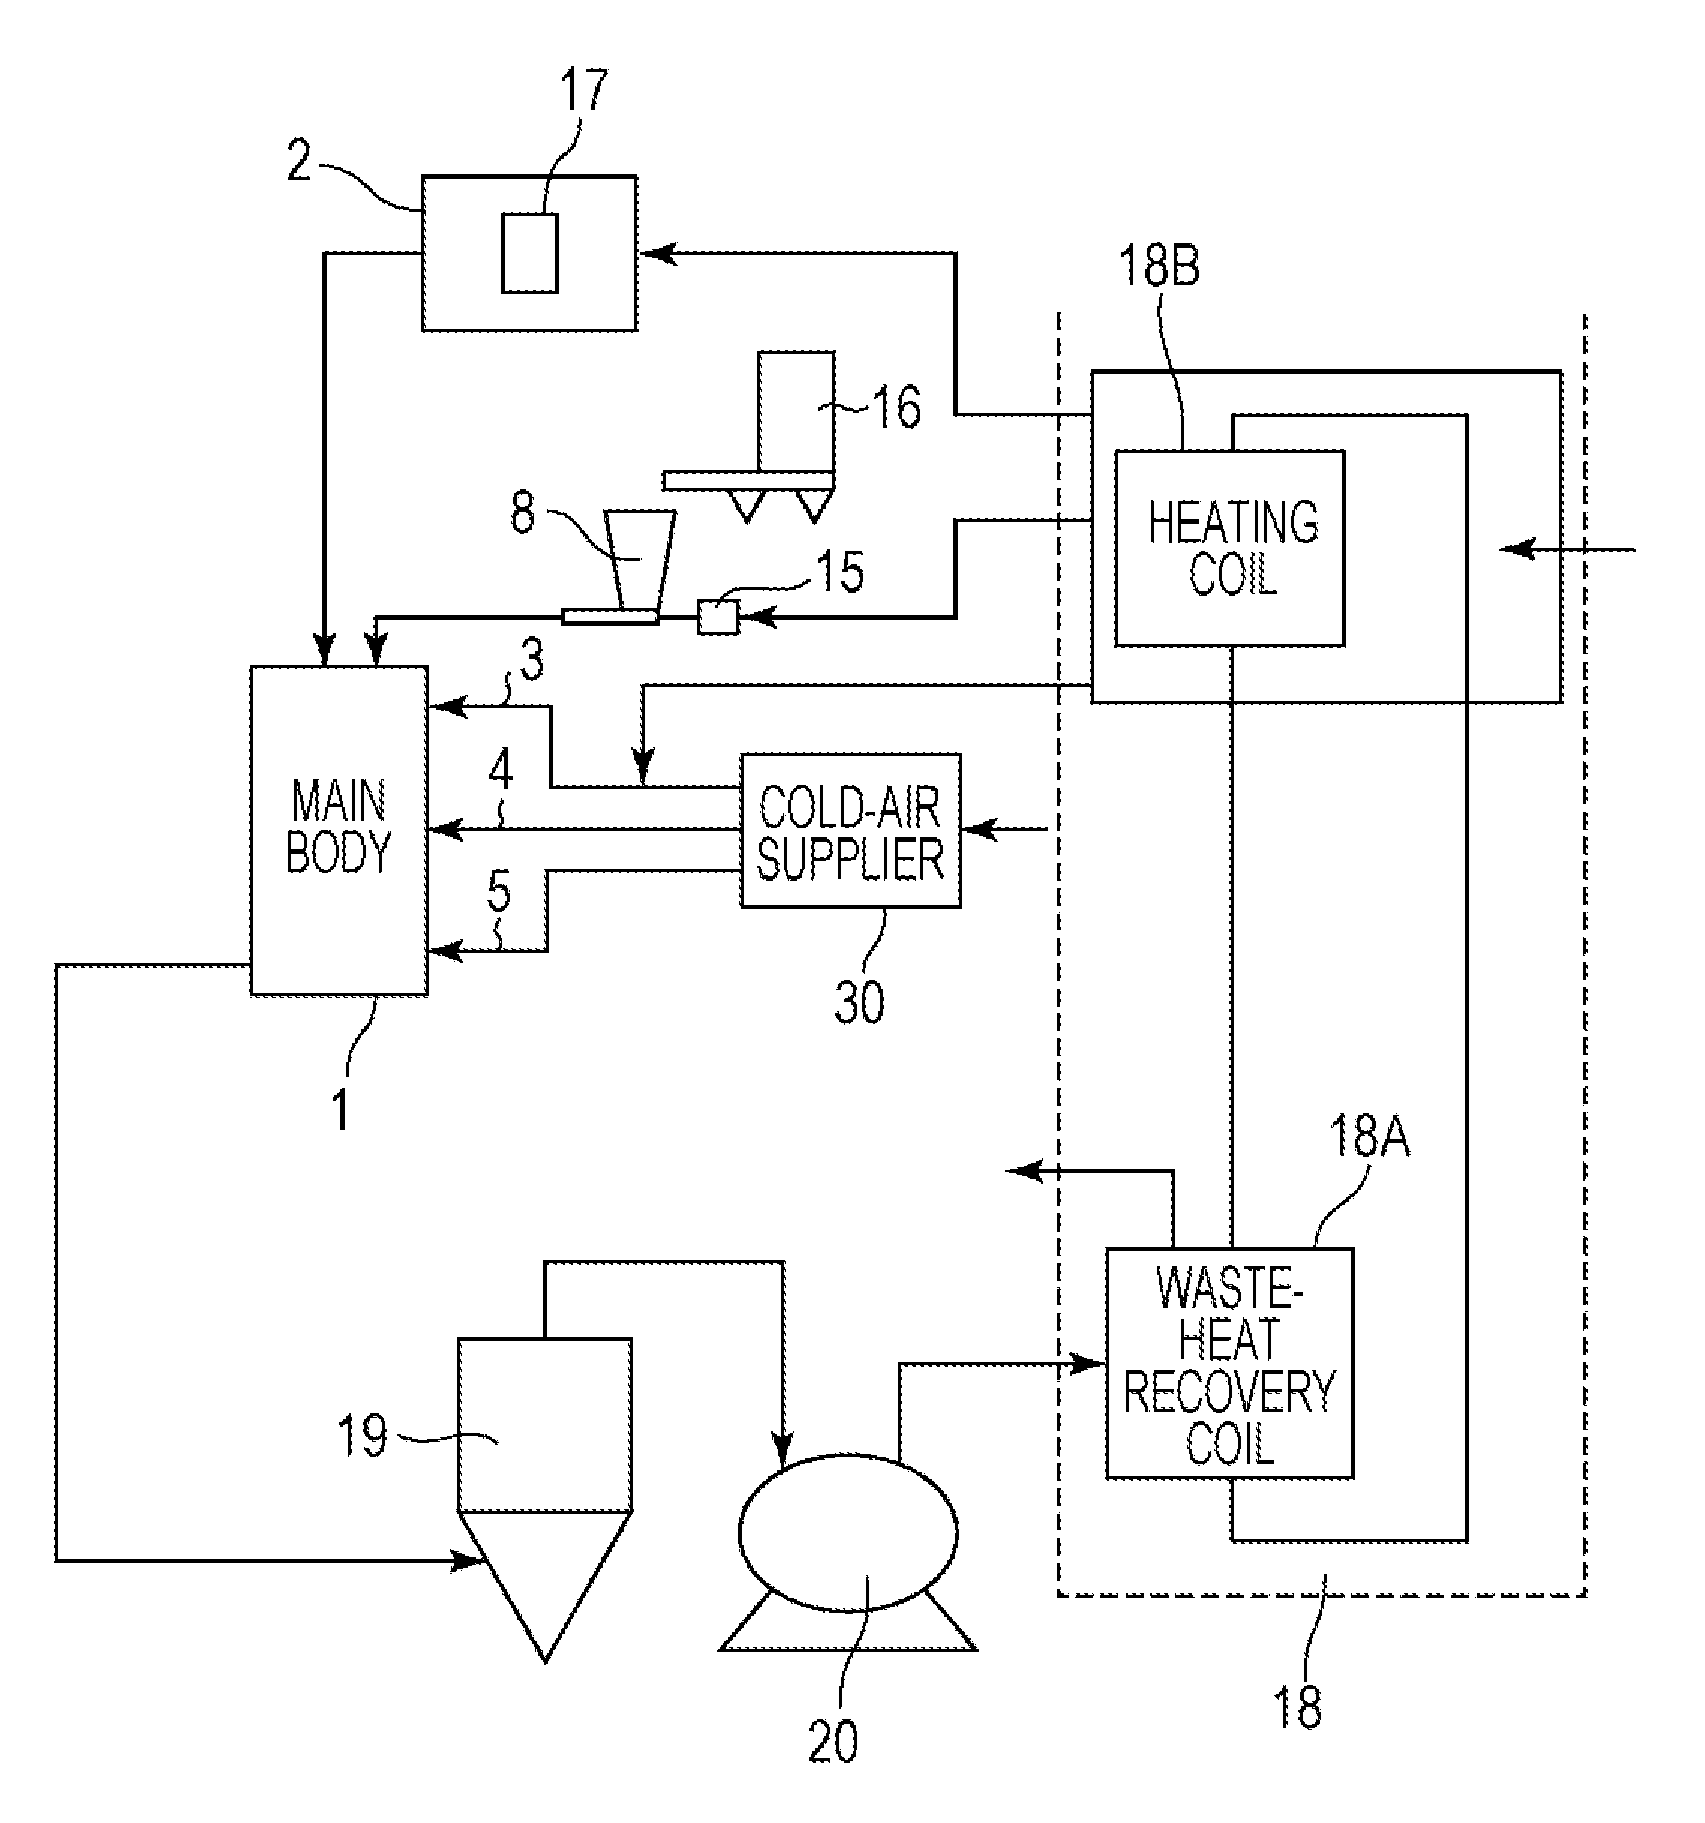 Apparatus for heat-treating toner and method for producing toner